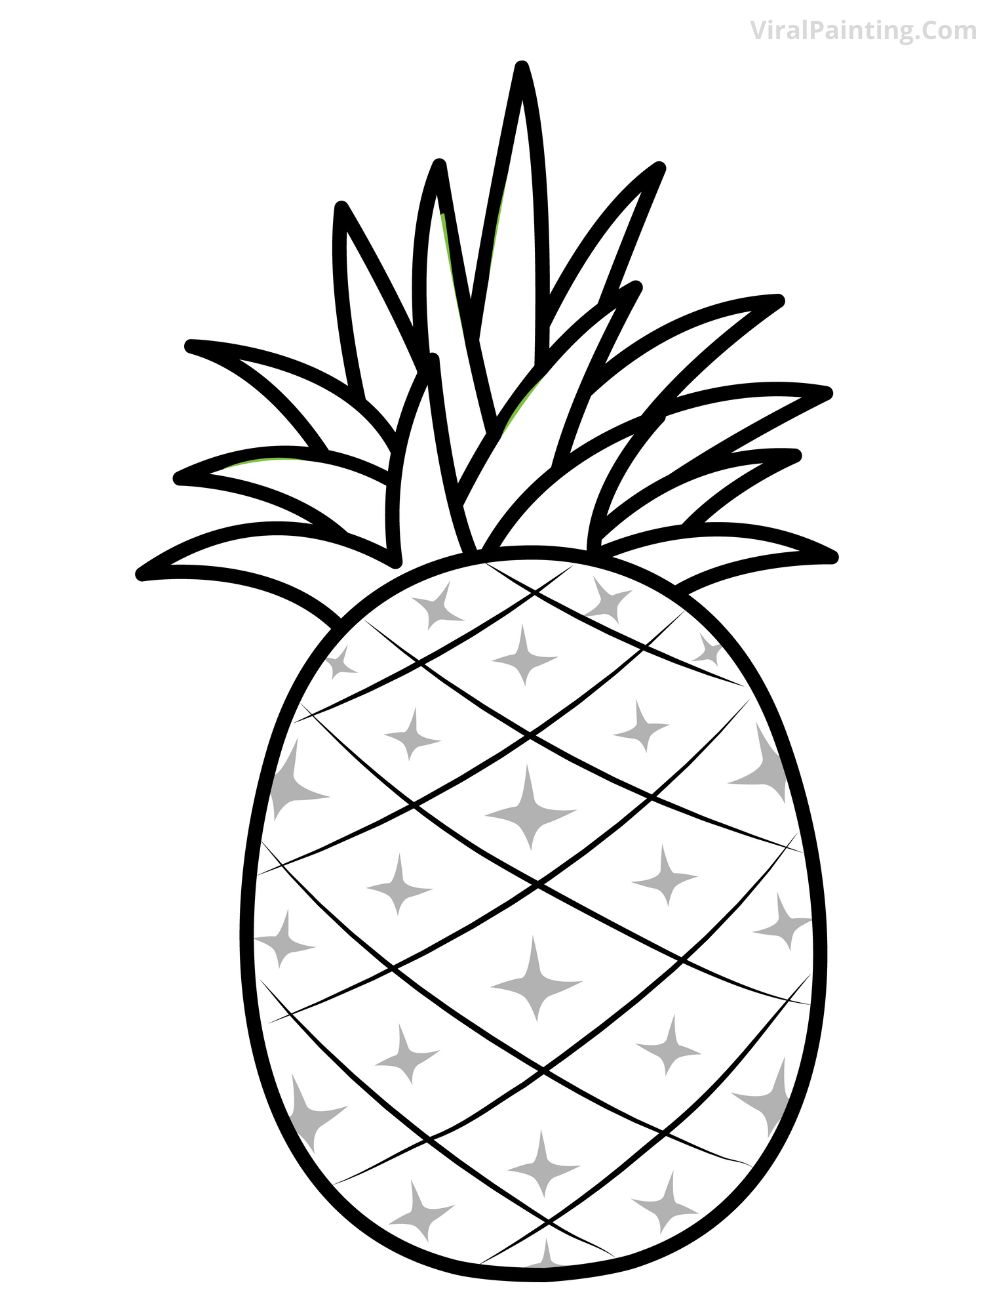 Simple and Easy pineapple drawing ideas for professional (2)